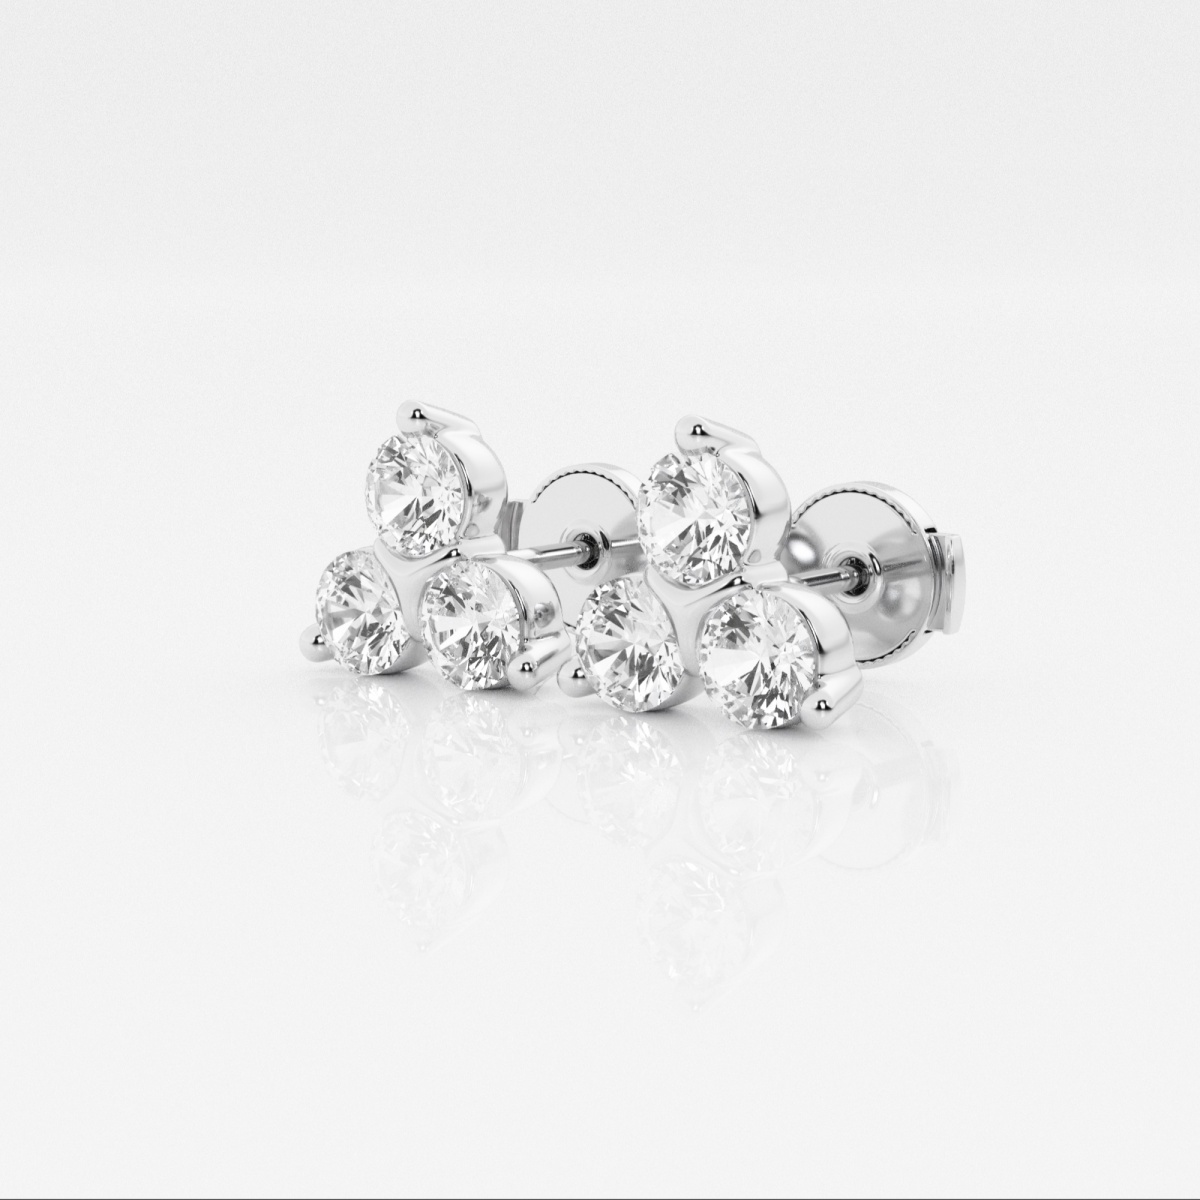 Additional Image 1 for  1 ctw Round Lab Grown Diamond Three-Stone Fashion Earrings